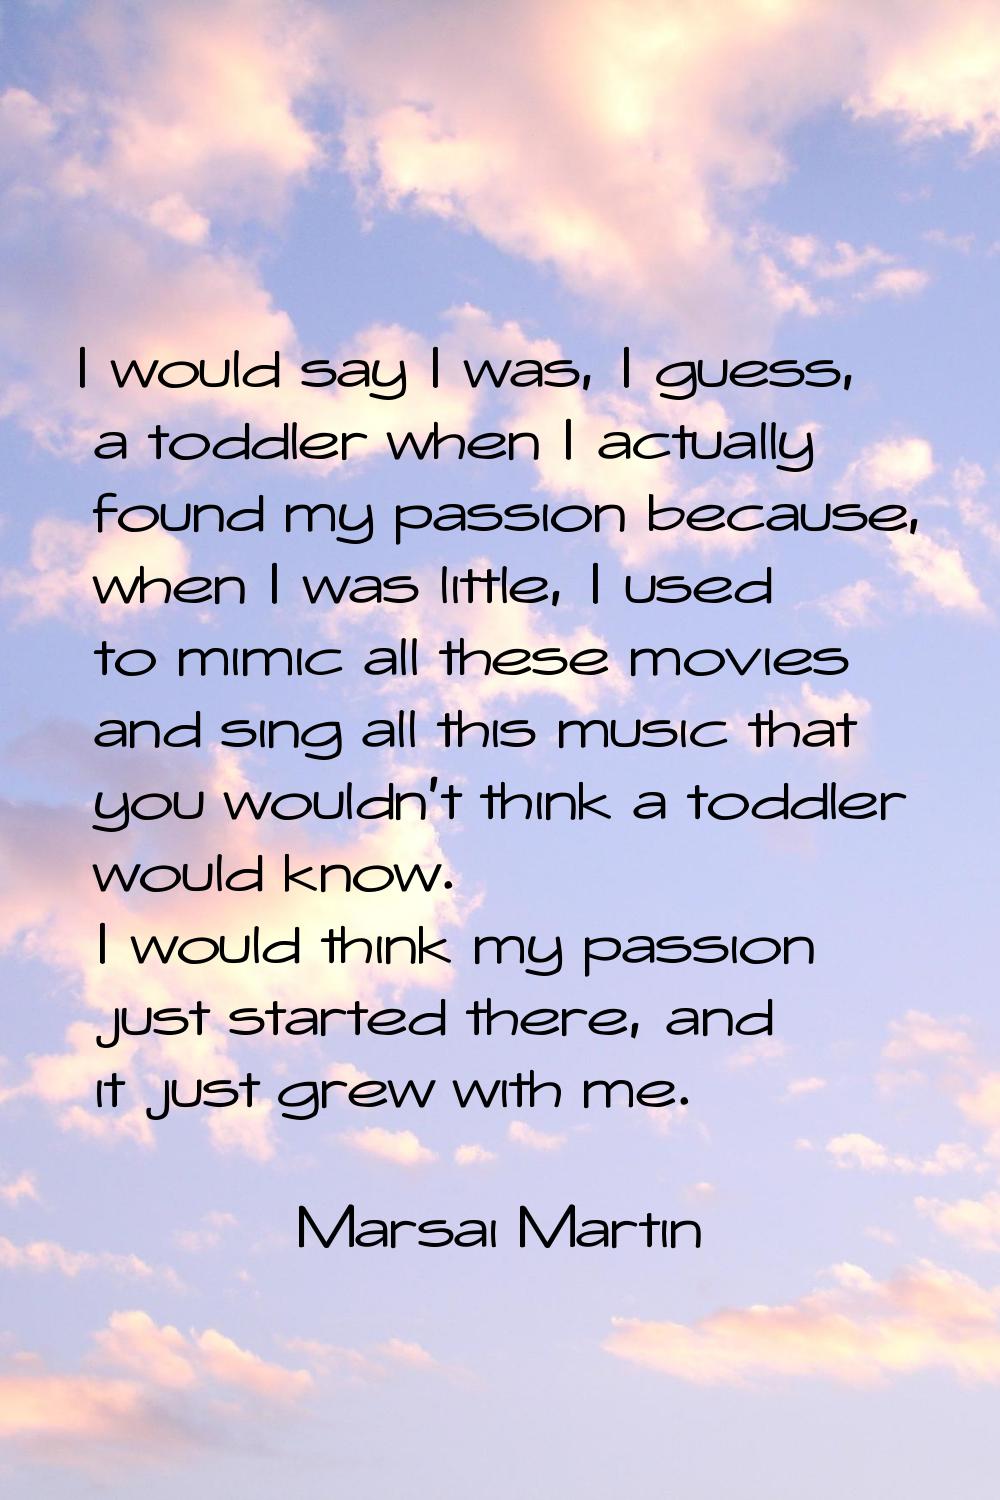 I would say I was, I guess, a toddler when I actually found my passion because, when I was little, 